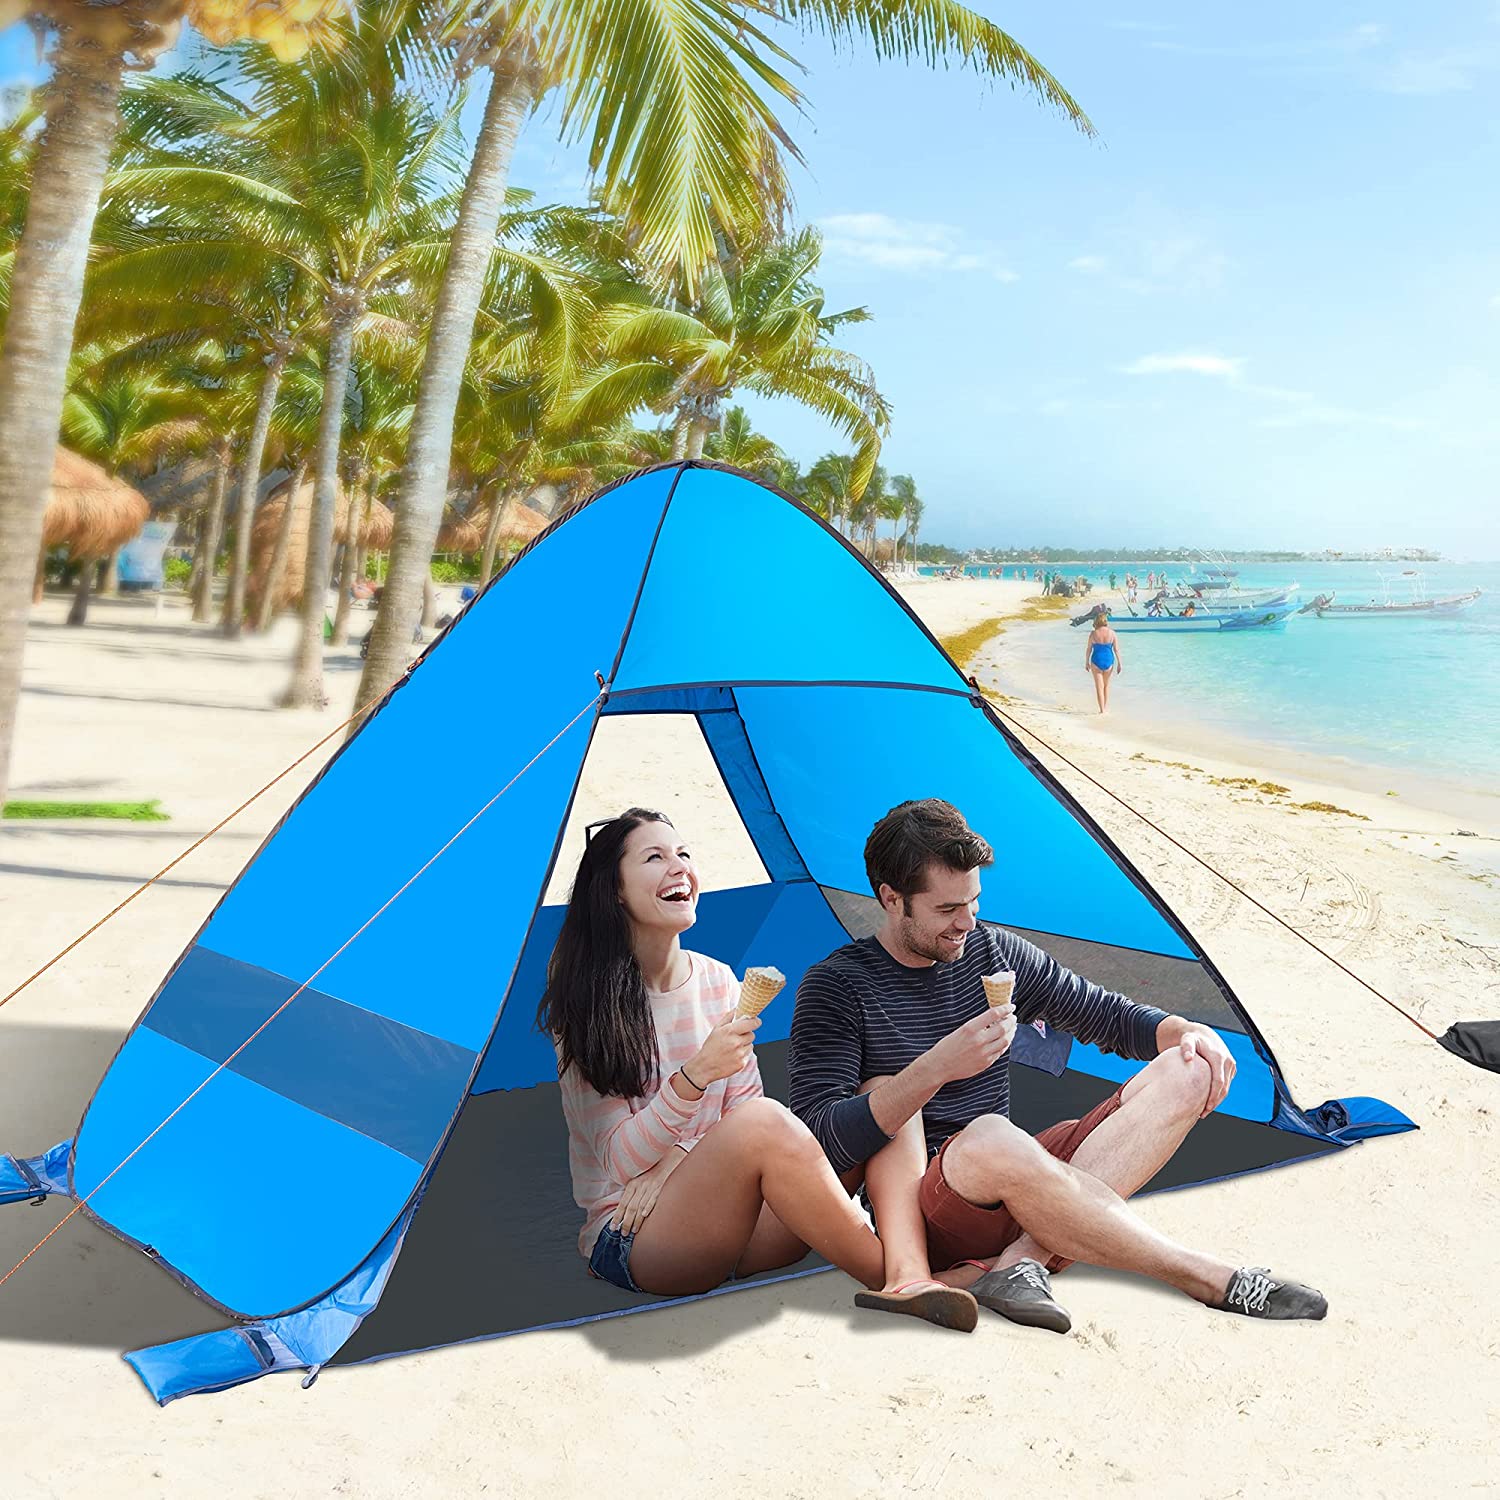 AKASO Pop-Up Beach Tent for 3-4 Person, 7.4' x 4.7' Shade Sun Shelter with UV Protectant Coating - image 4 of 9